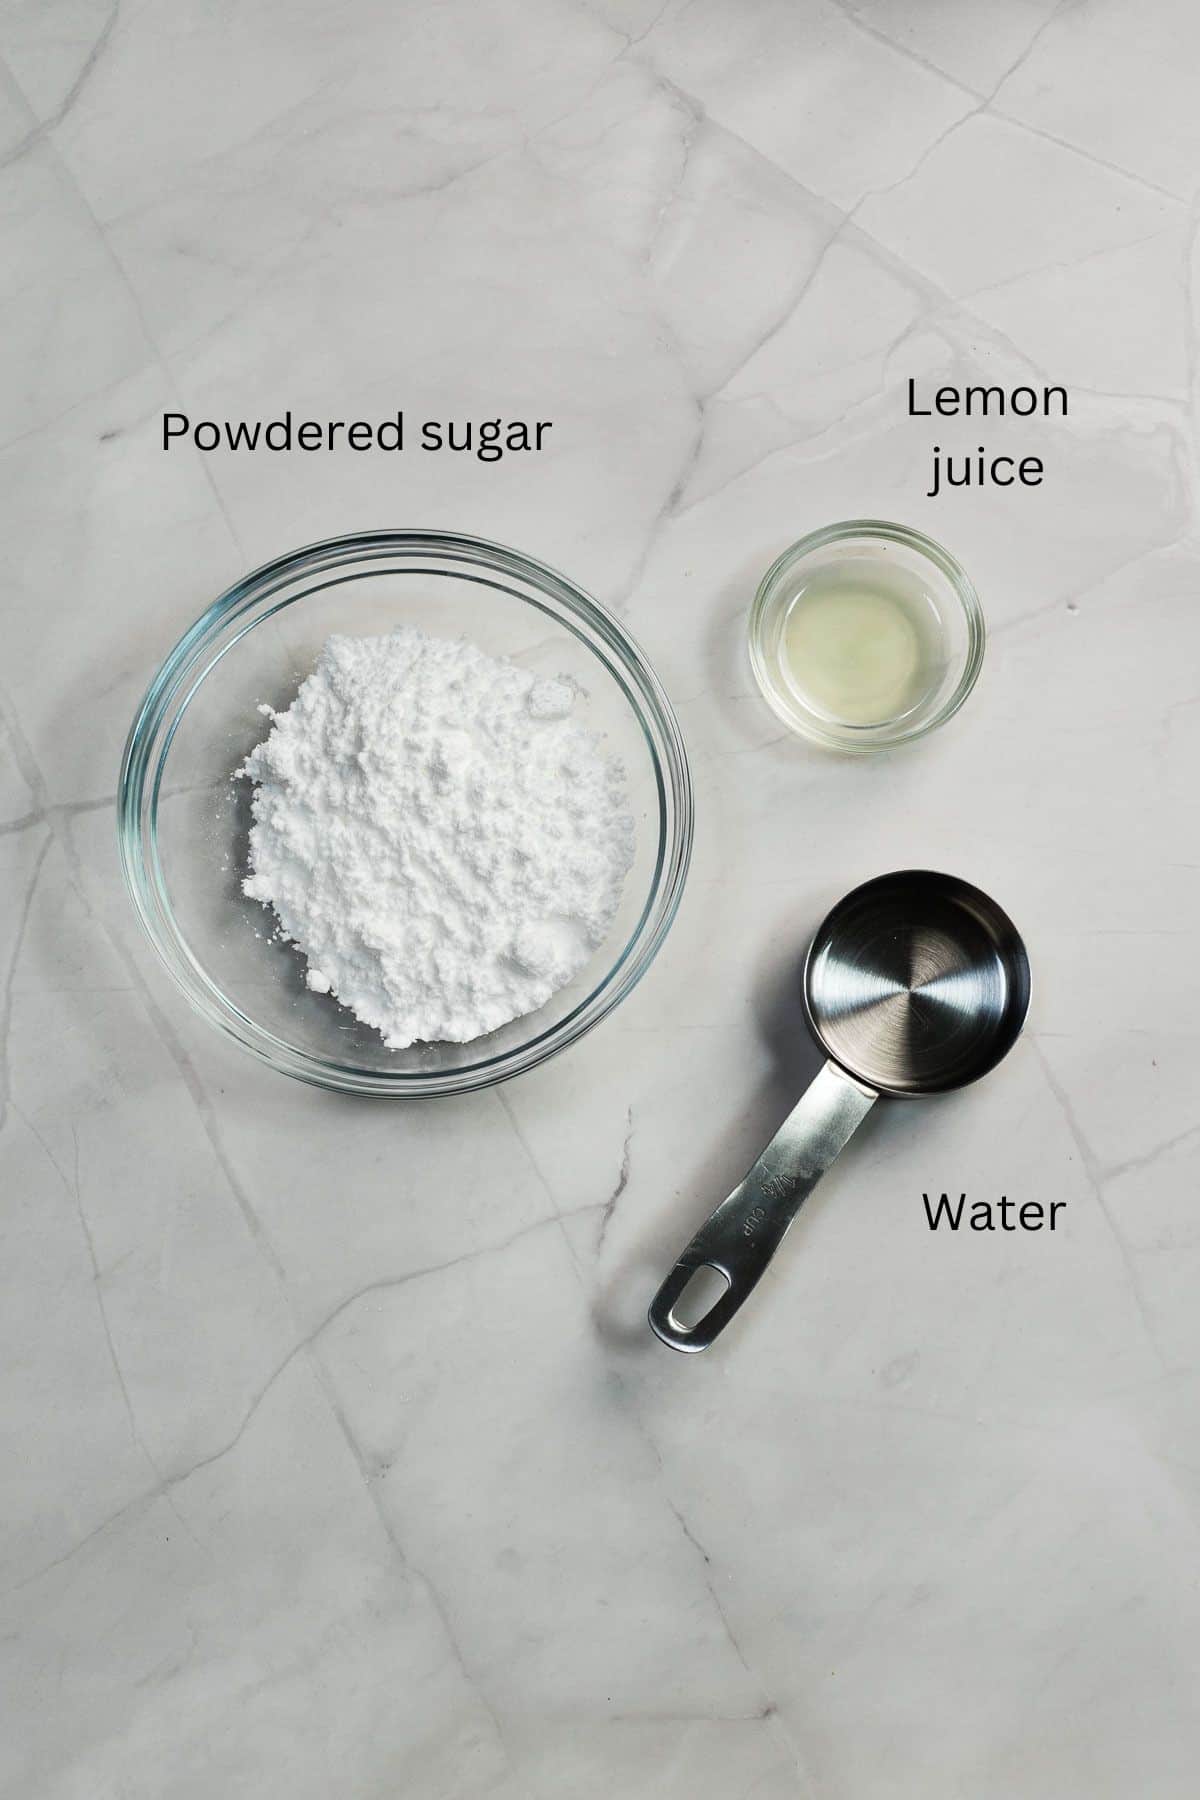 Powdered sugar in a bowl, lemon juice in a bowl and water in a cup against a marble background.